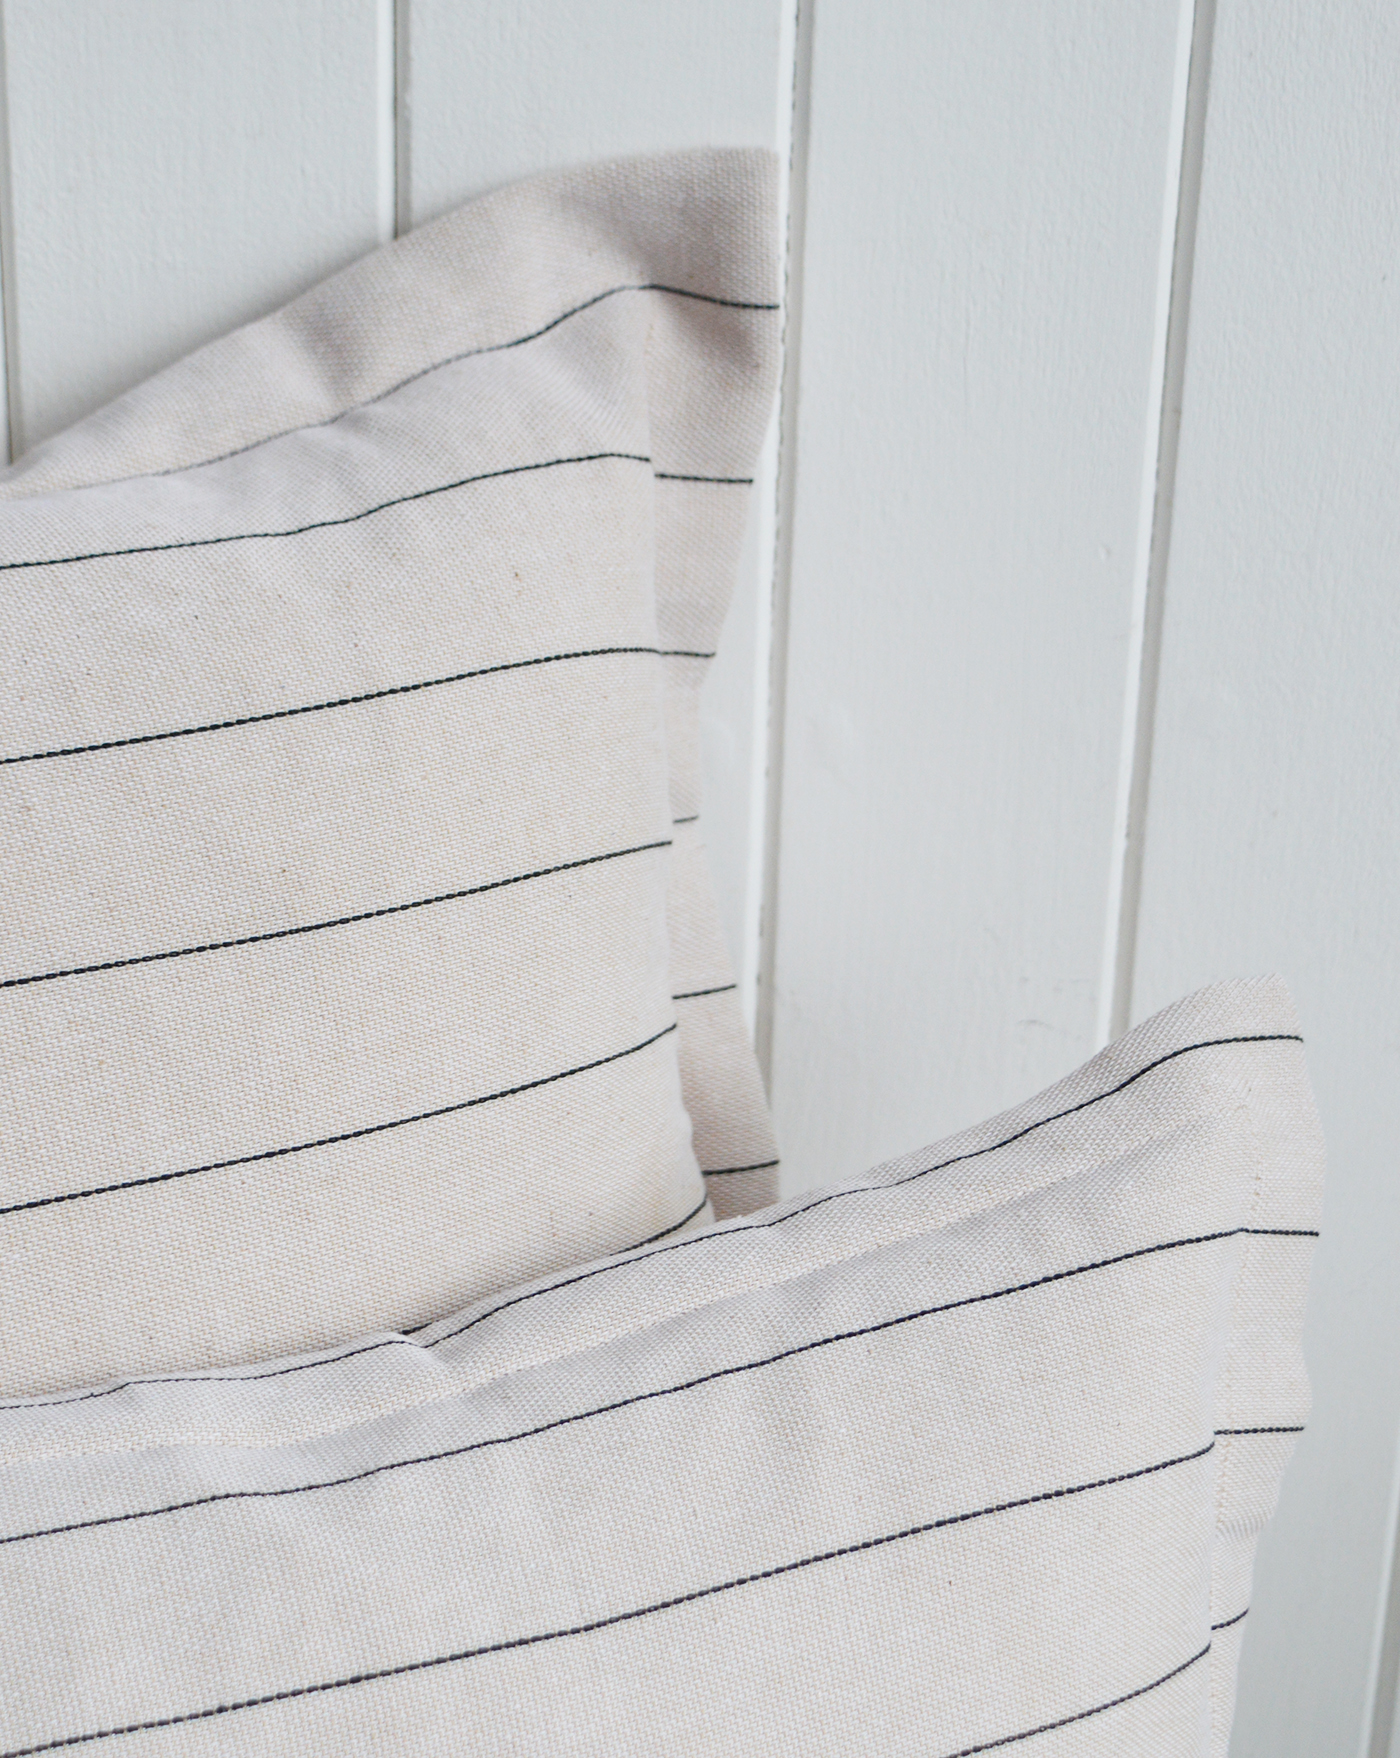 New England Style Country, Coastal and White Furniture and accessories for the home. Hamptons and New England coastal cushions and soft furnishings - Peabody Stripe Cushion Covers in rectangle